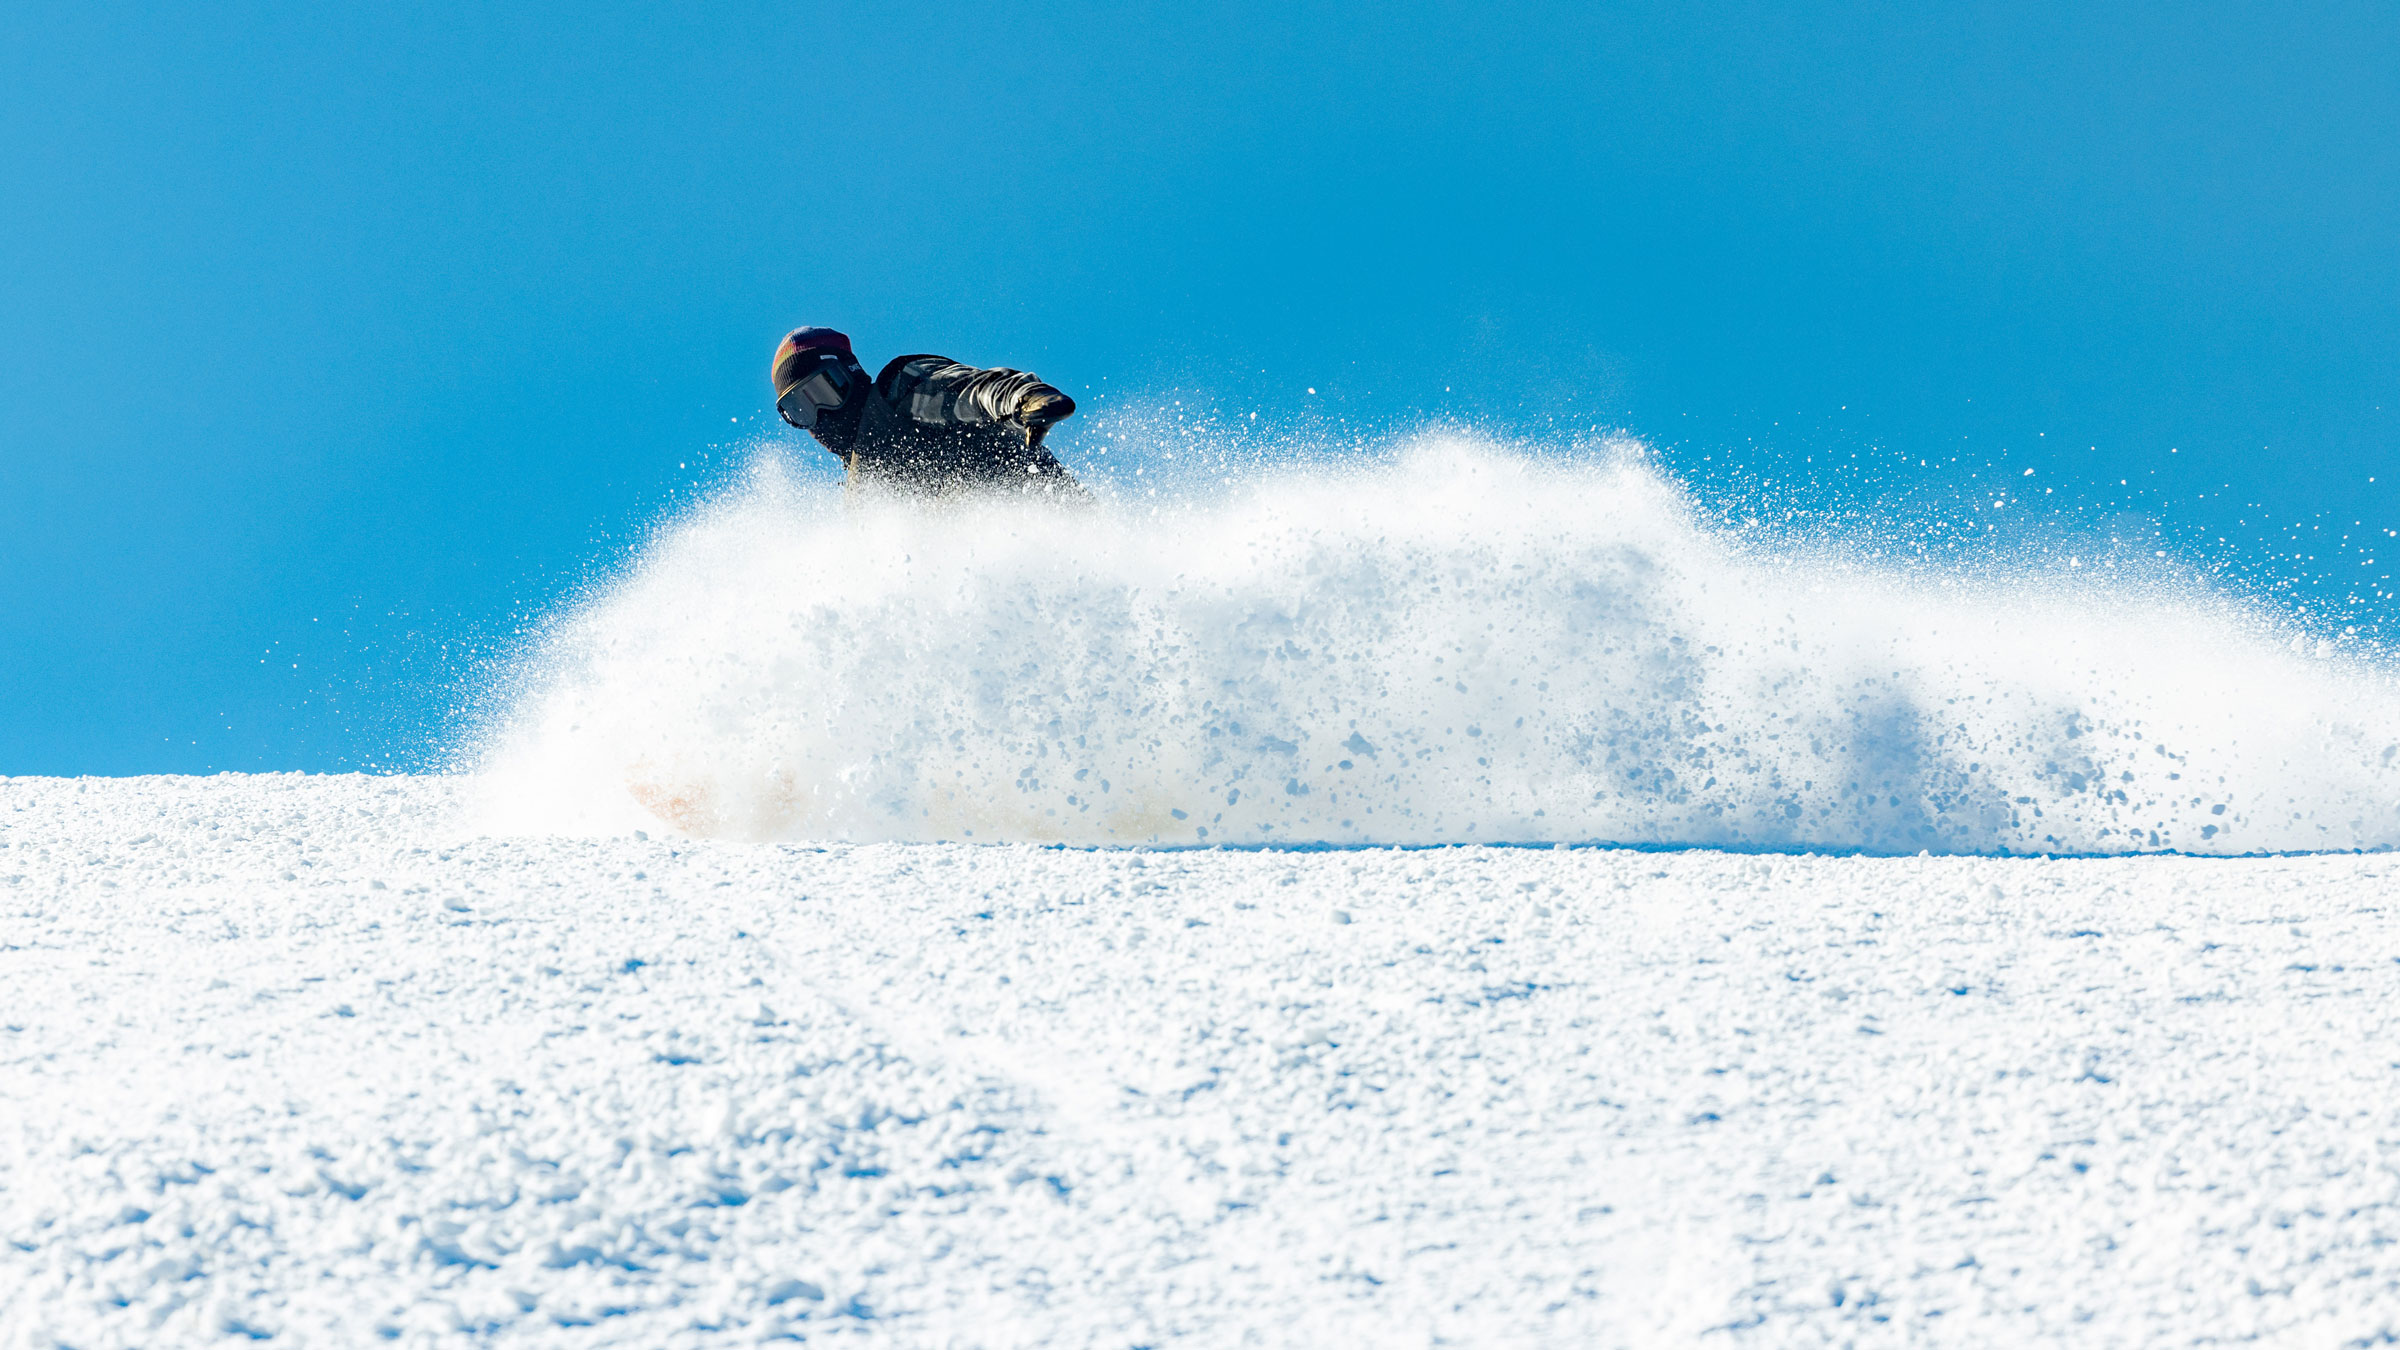 Snowboarder in fresh powder with sunny skies